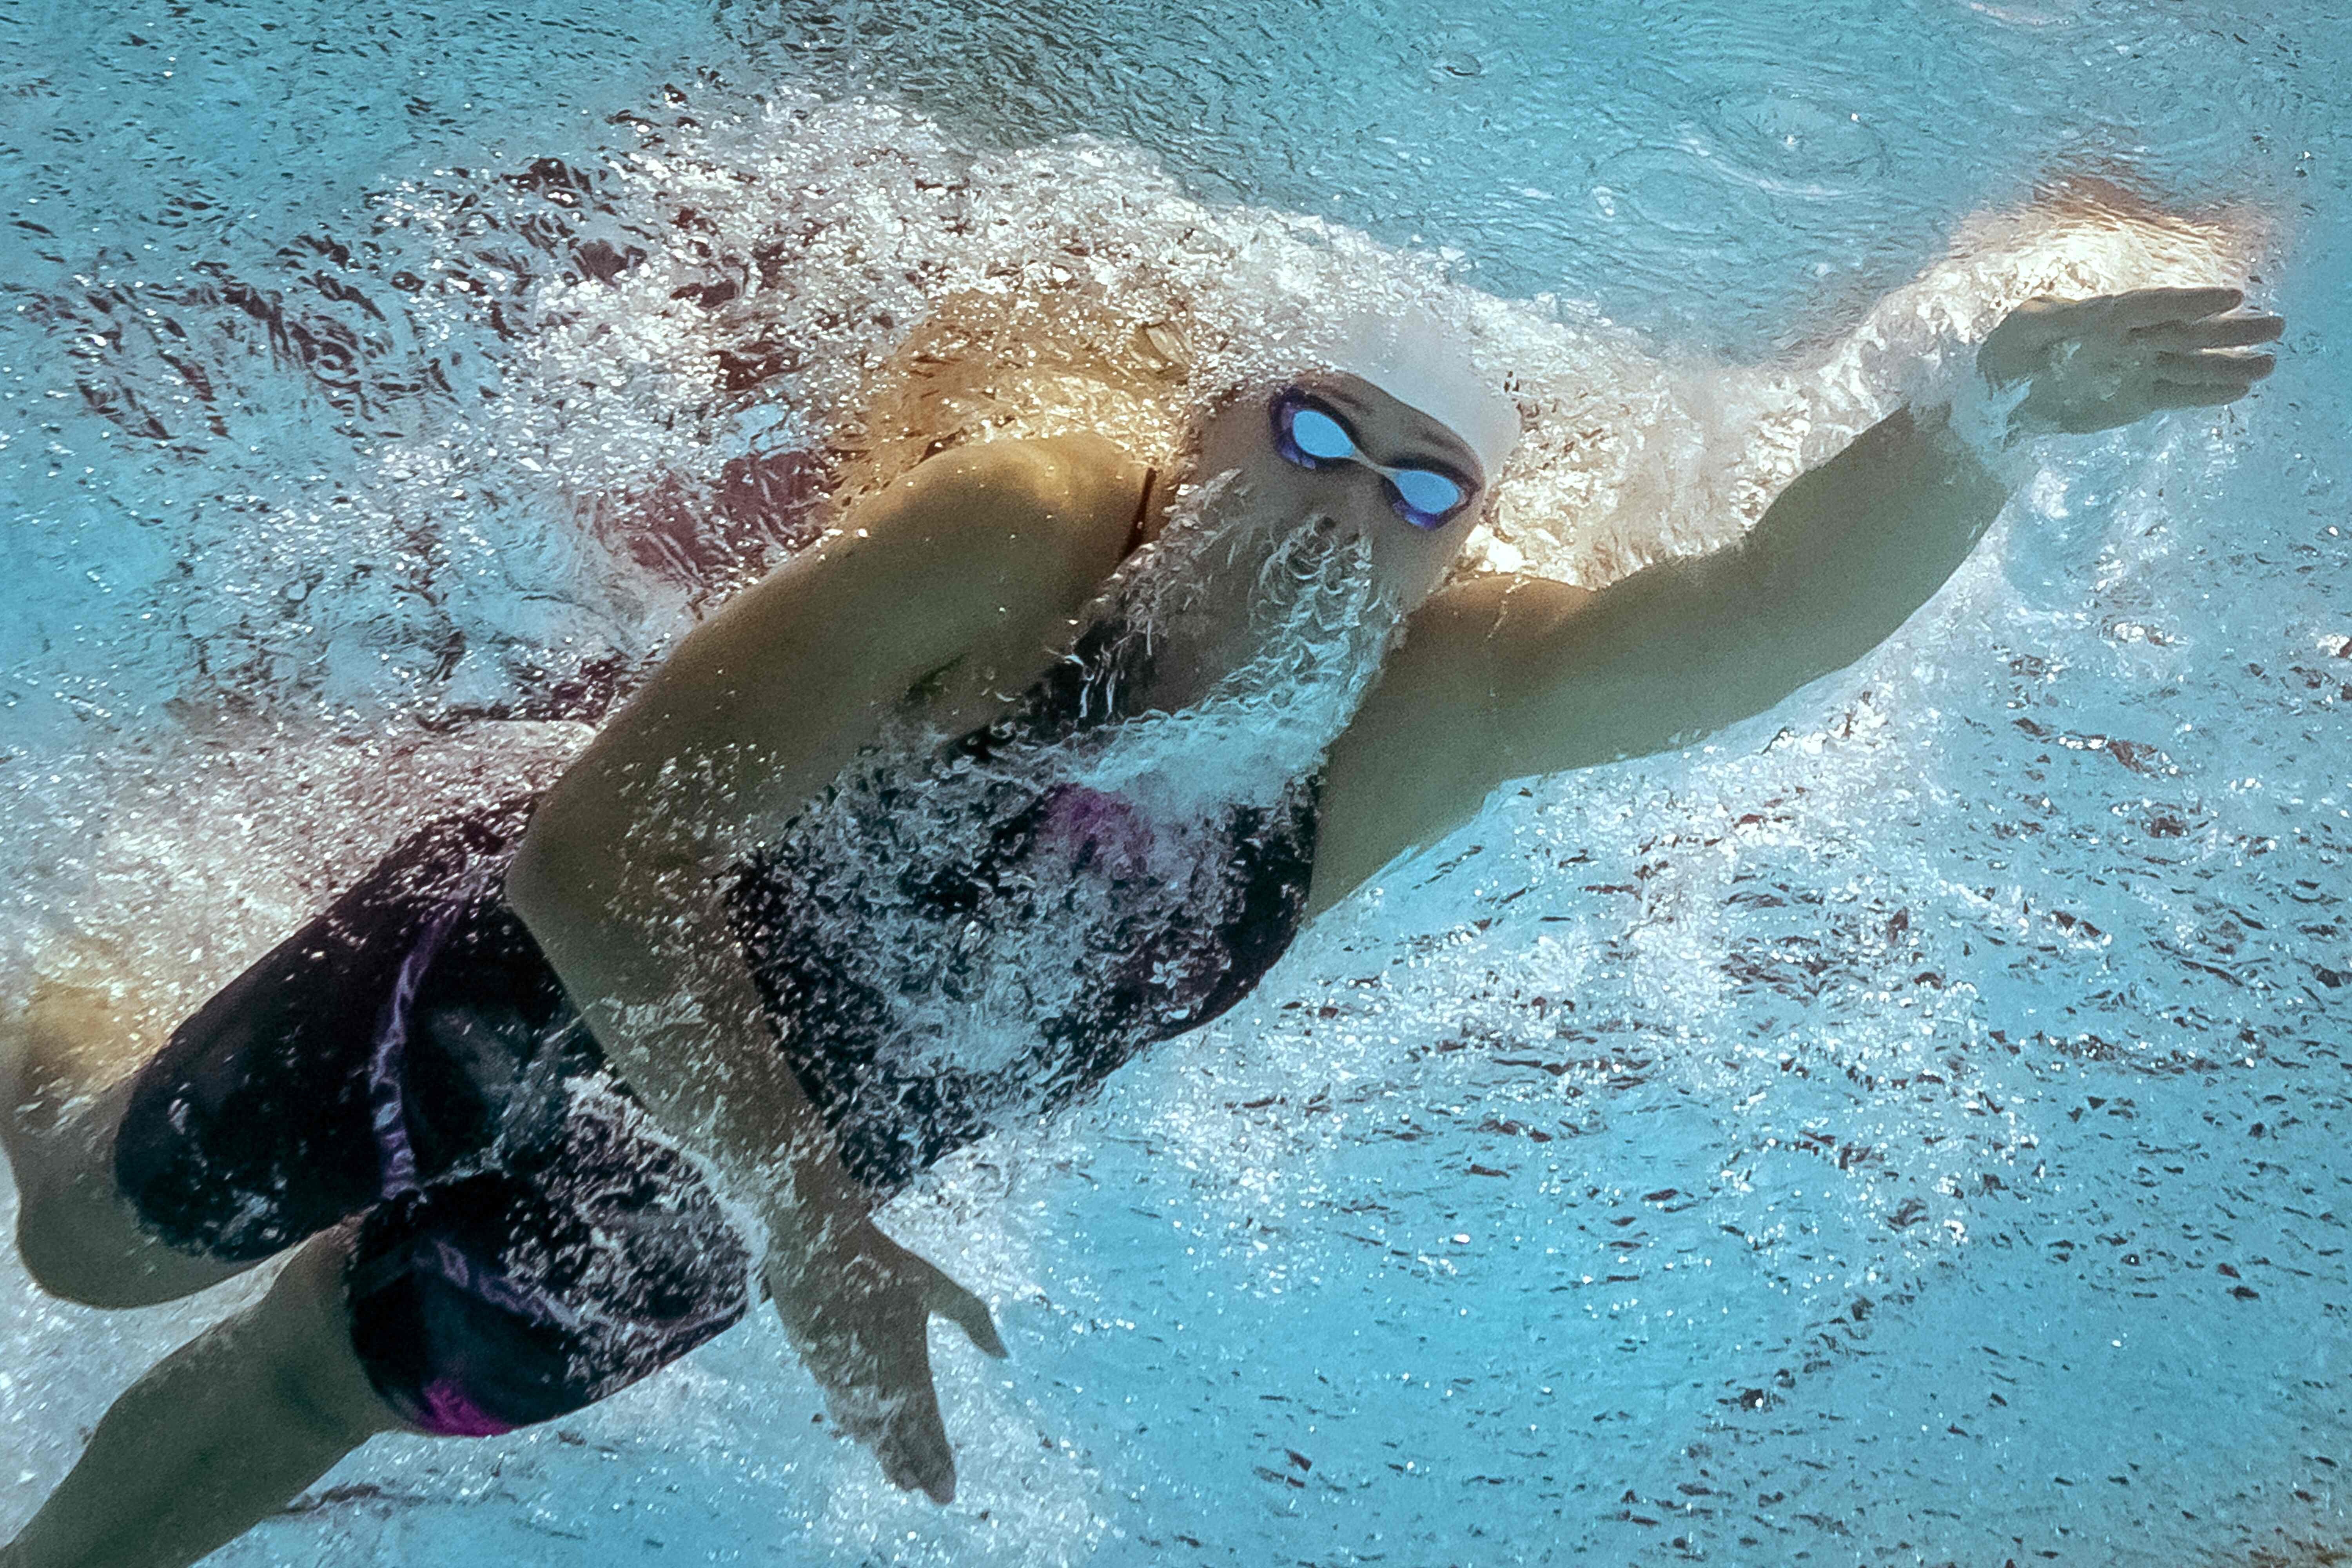 Hong Kong's Siobhan Haughey in the women's 200m freestyle at the 2019 World Championships in South Korea. Photo: AFP